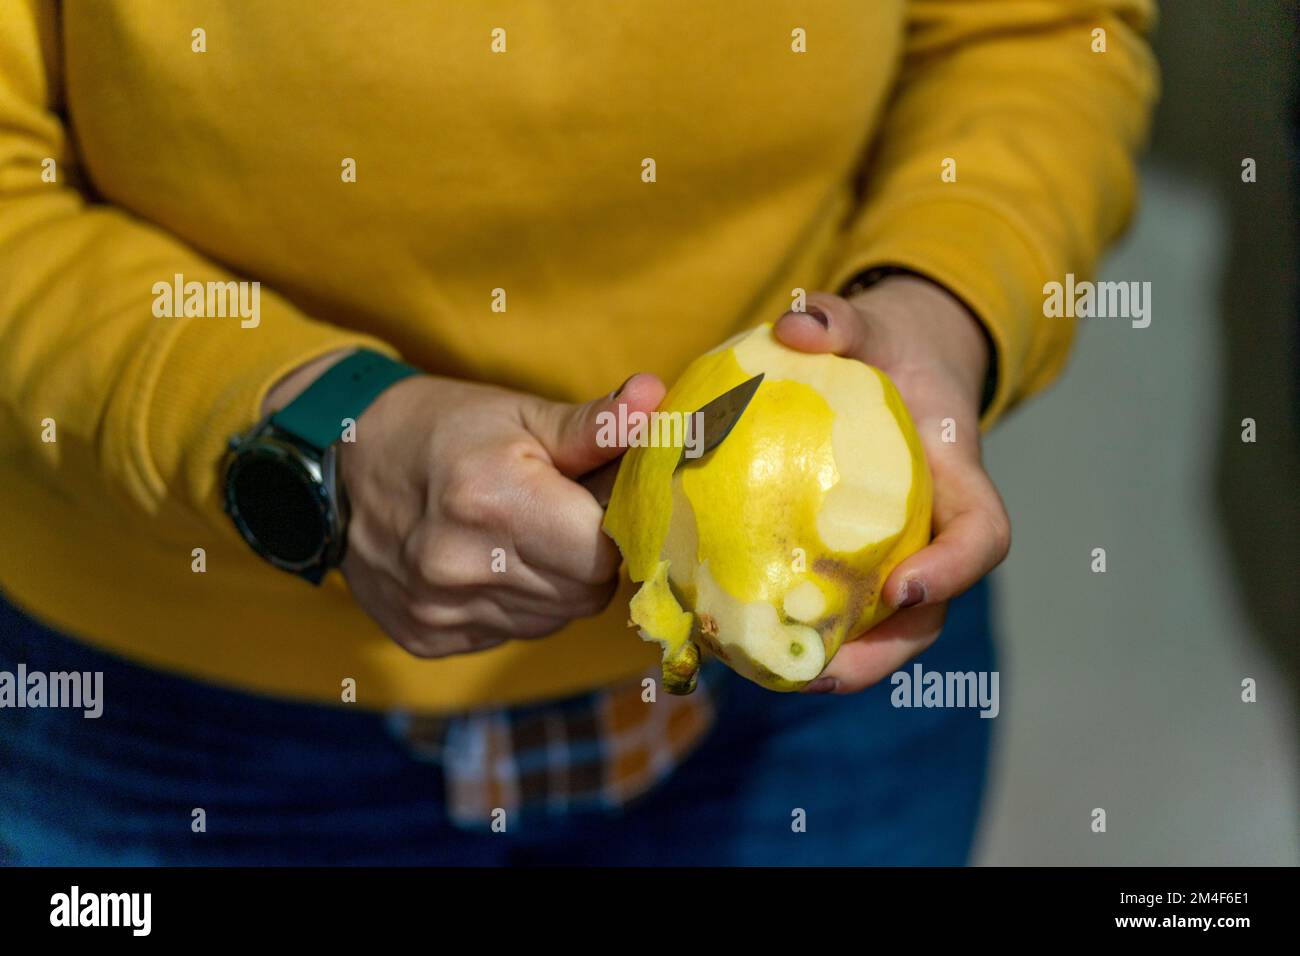 Close up of a person peeling fruit with a small sharp knife Stock Photo